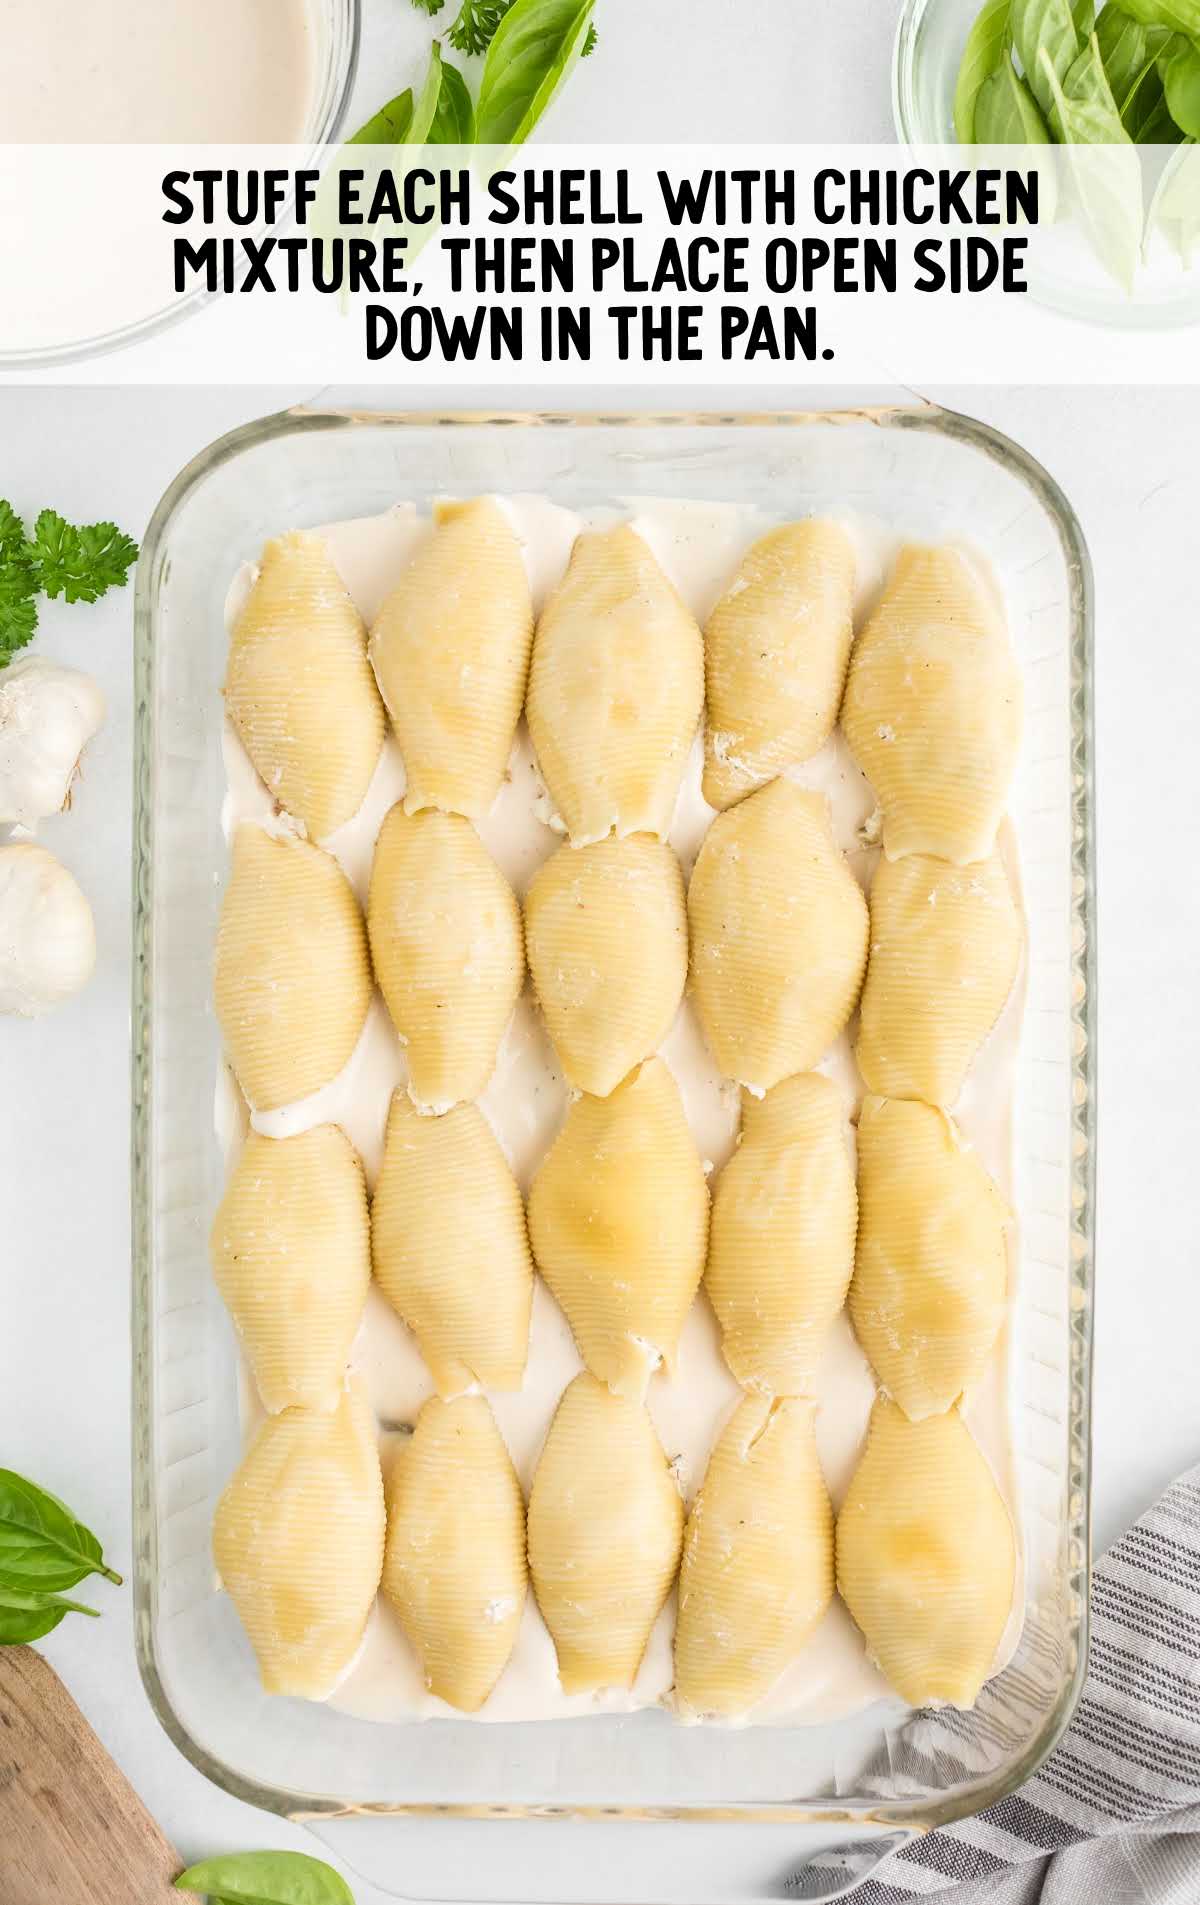 chicken mixture stuffed in each shell in a baking dish